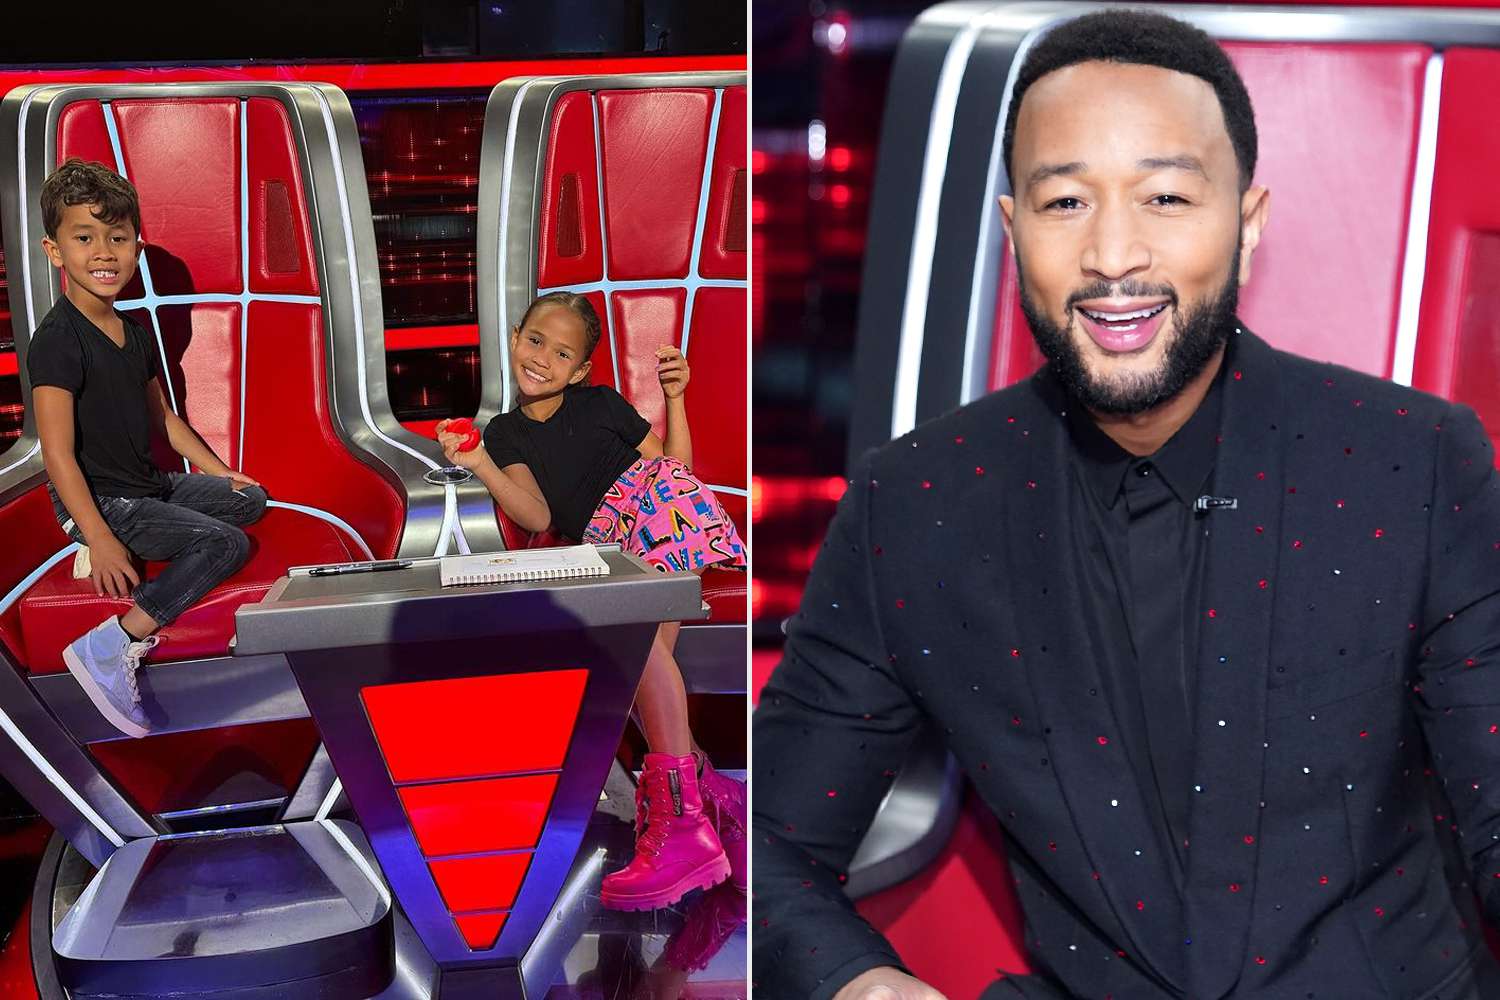 John Legend's Daughter Luna, 8, Adorably Interviews Her Dad as She Attends 'The Voice' Finale with Brother Miles